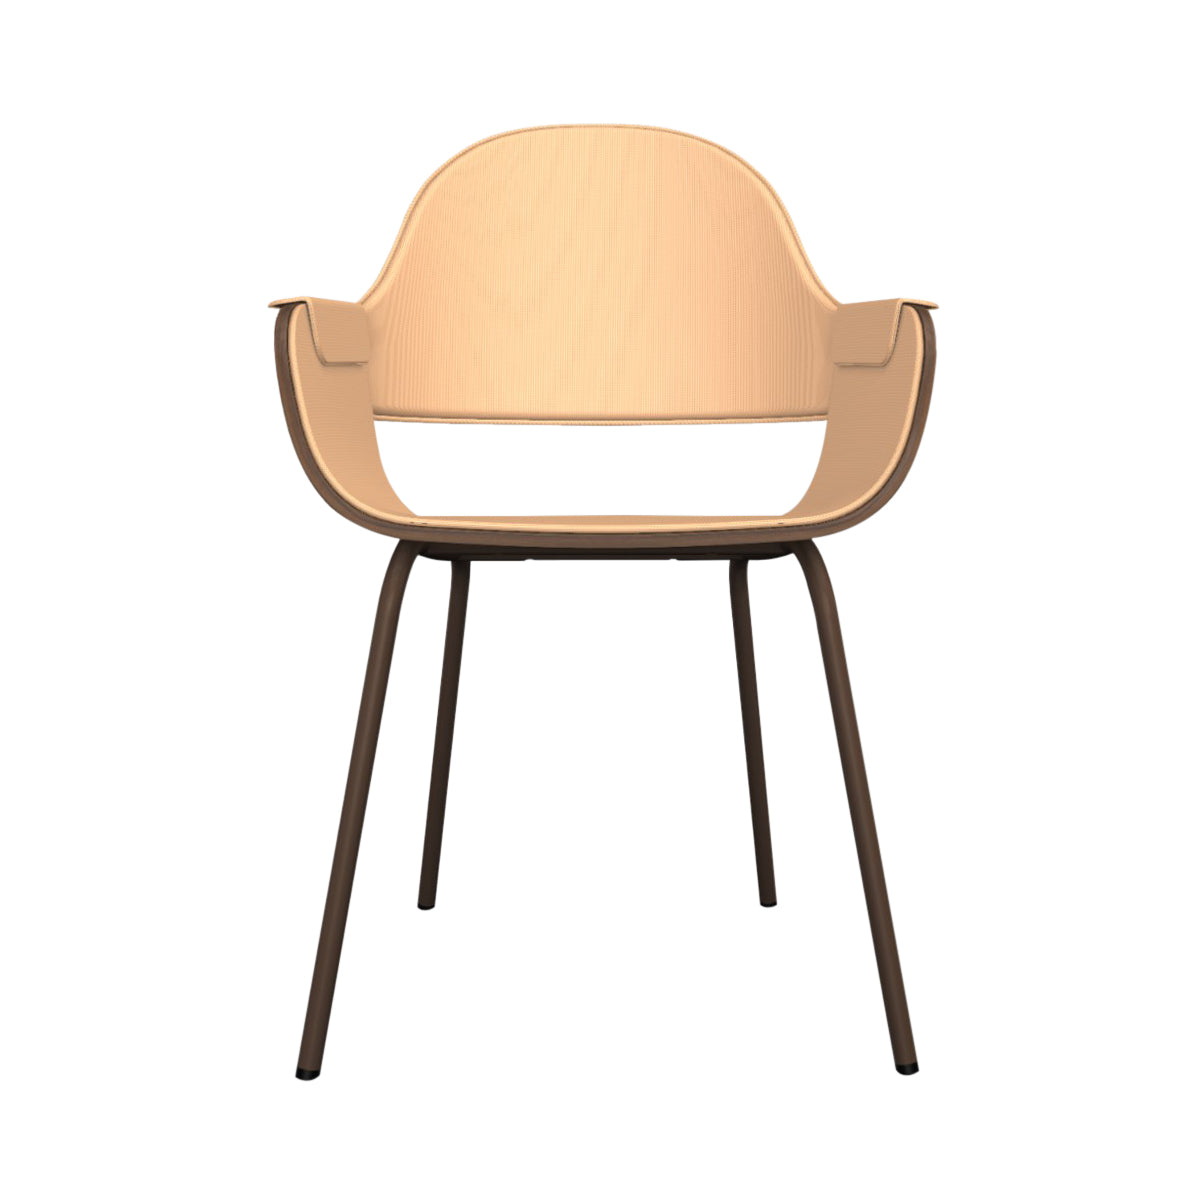 Showtime Nude Chair with Metal Base: Full Upholstered + Walnut + Pale Brown